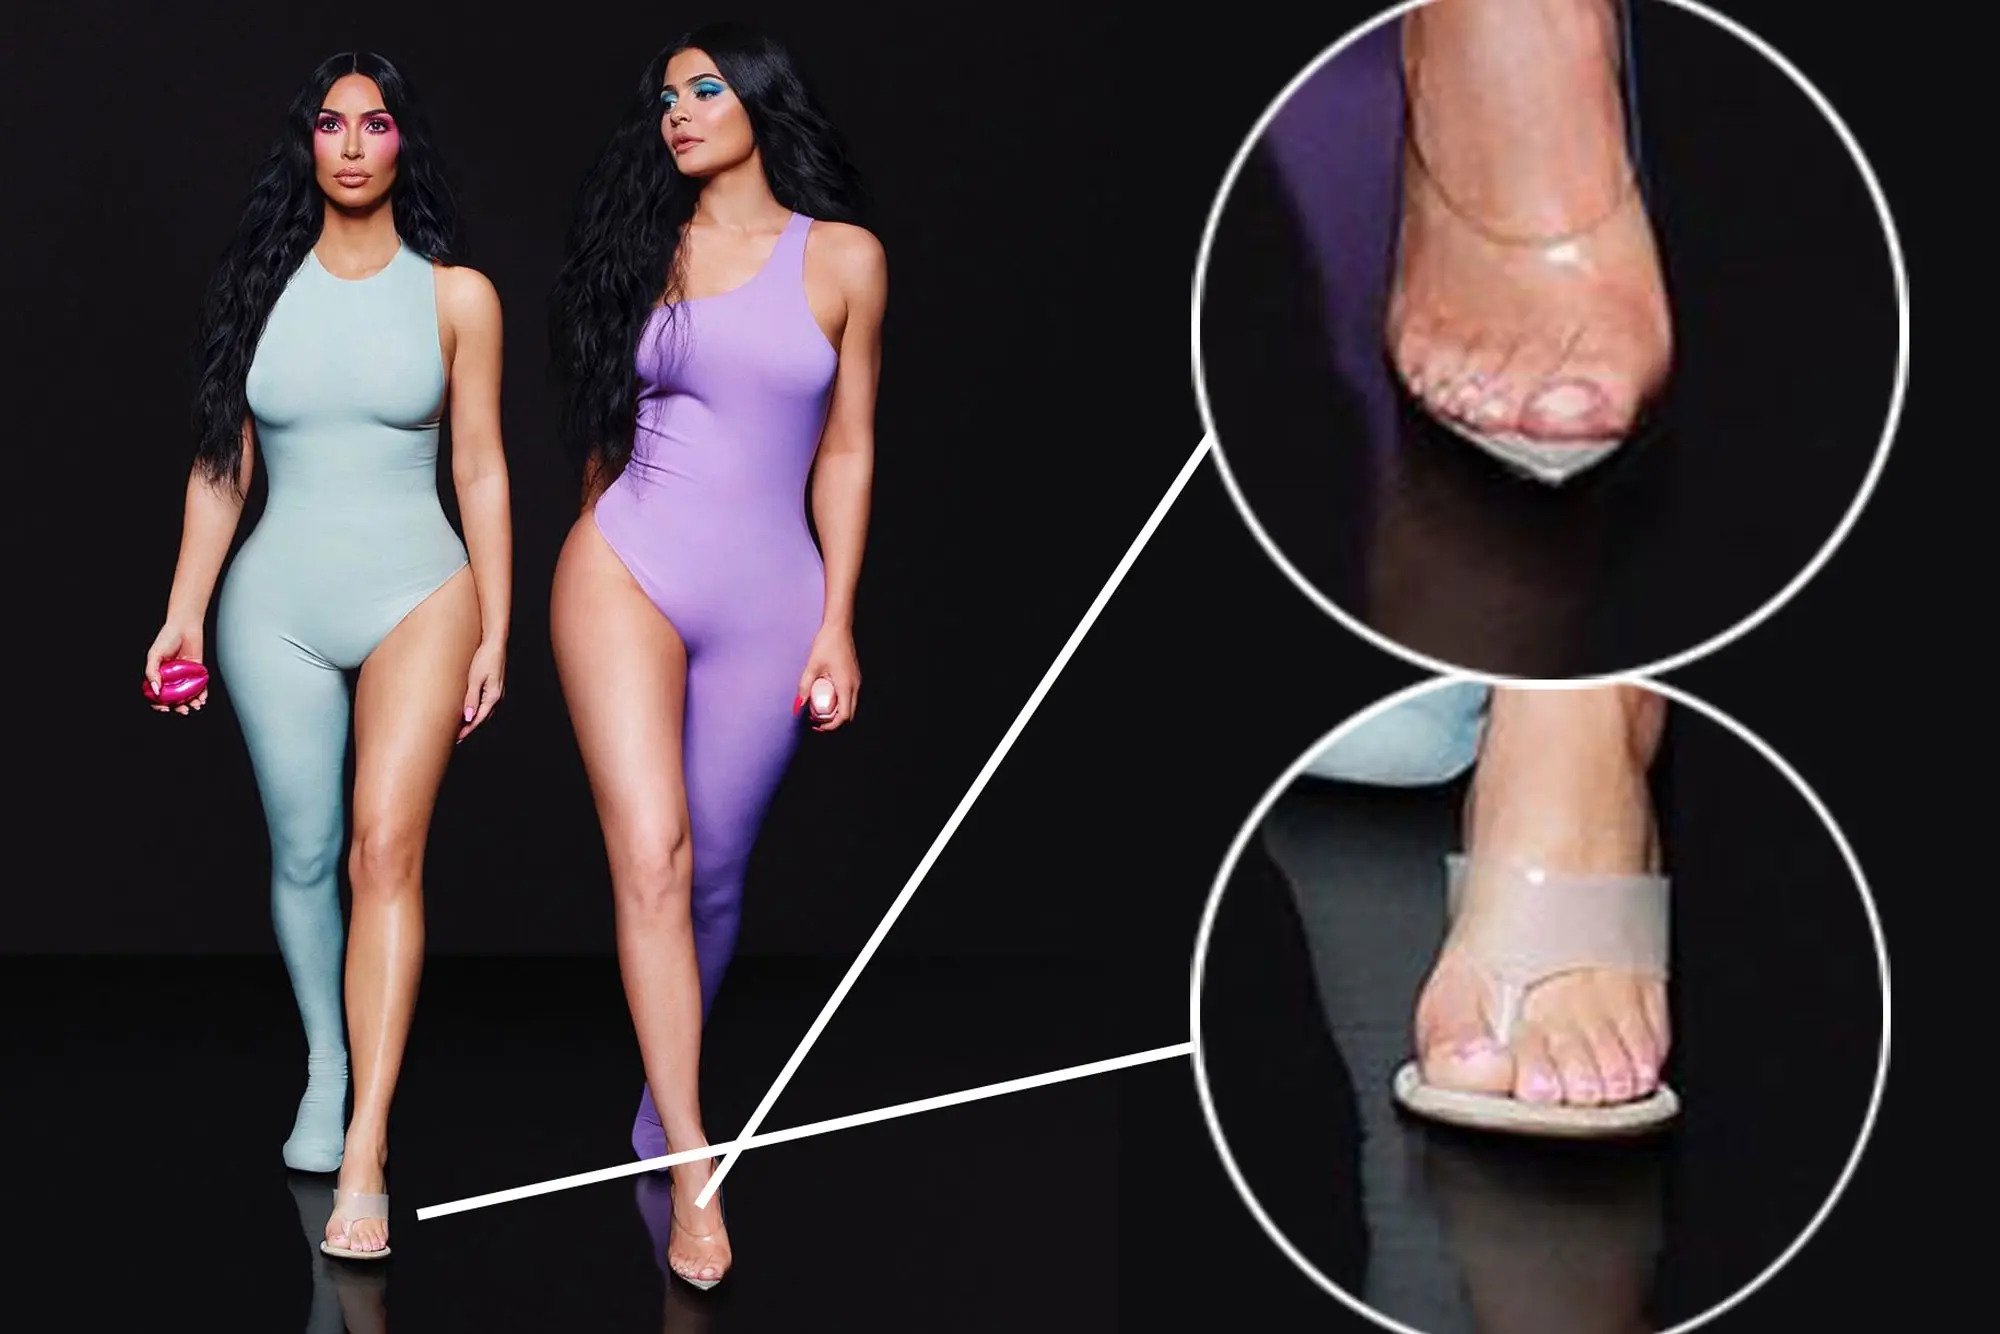 Kim Kardashian in a light blue full-body suit and Kylie in a purple full-body suit